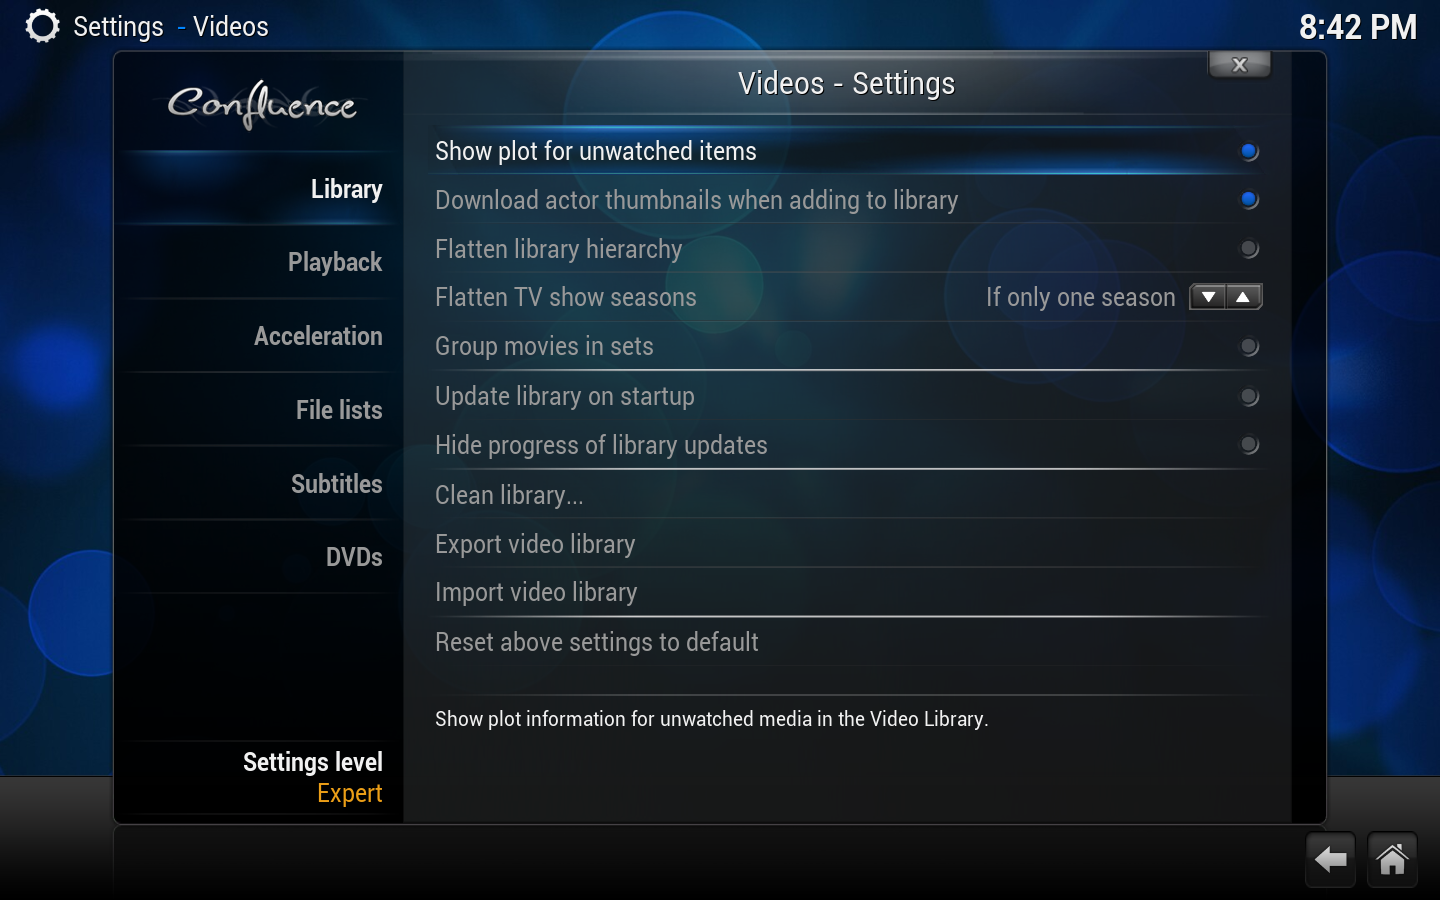 Settings.videos.library.png